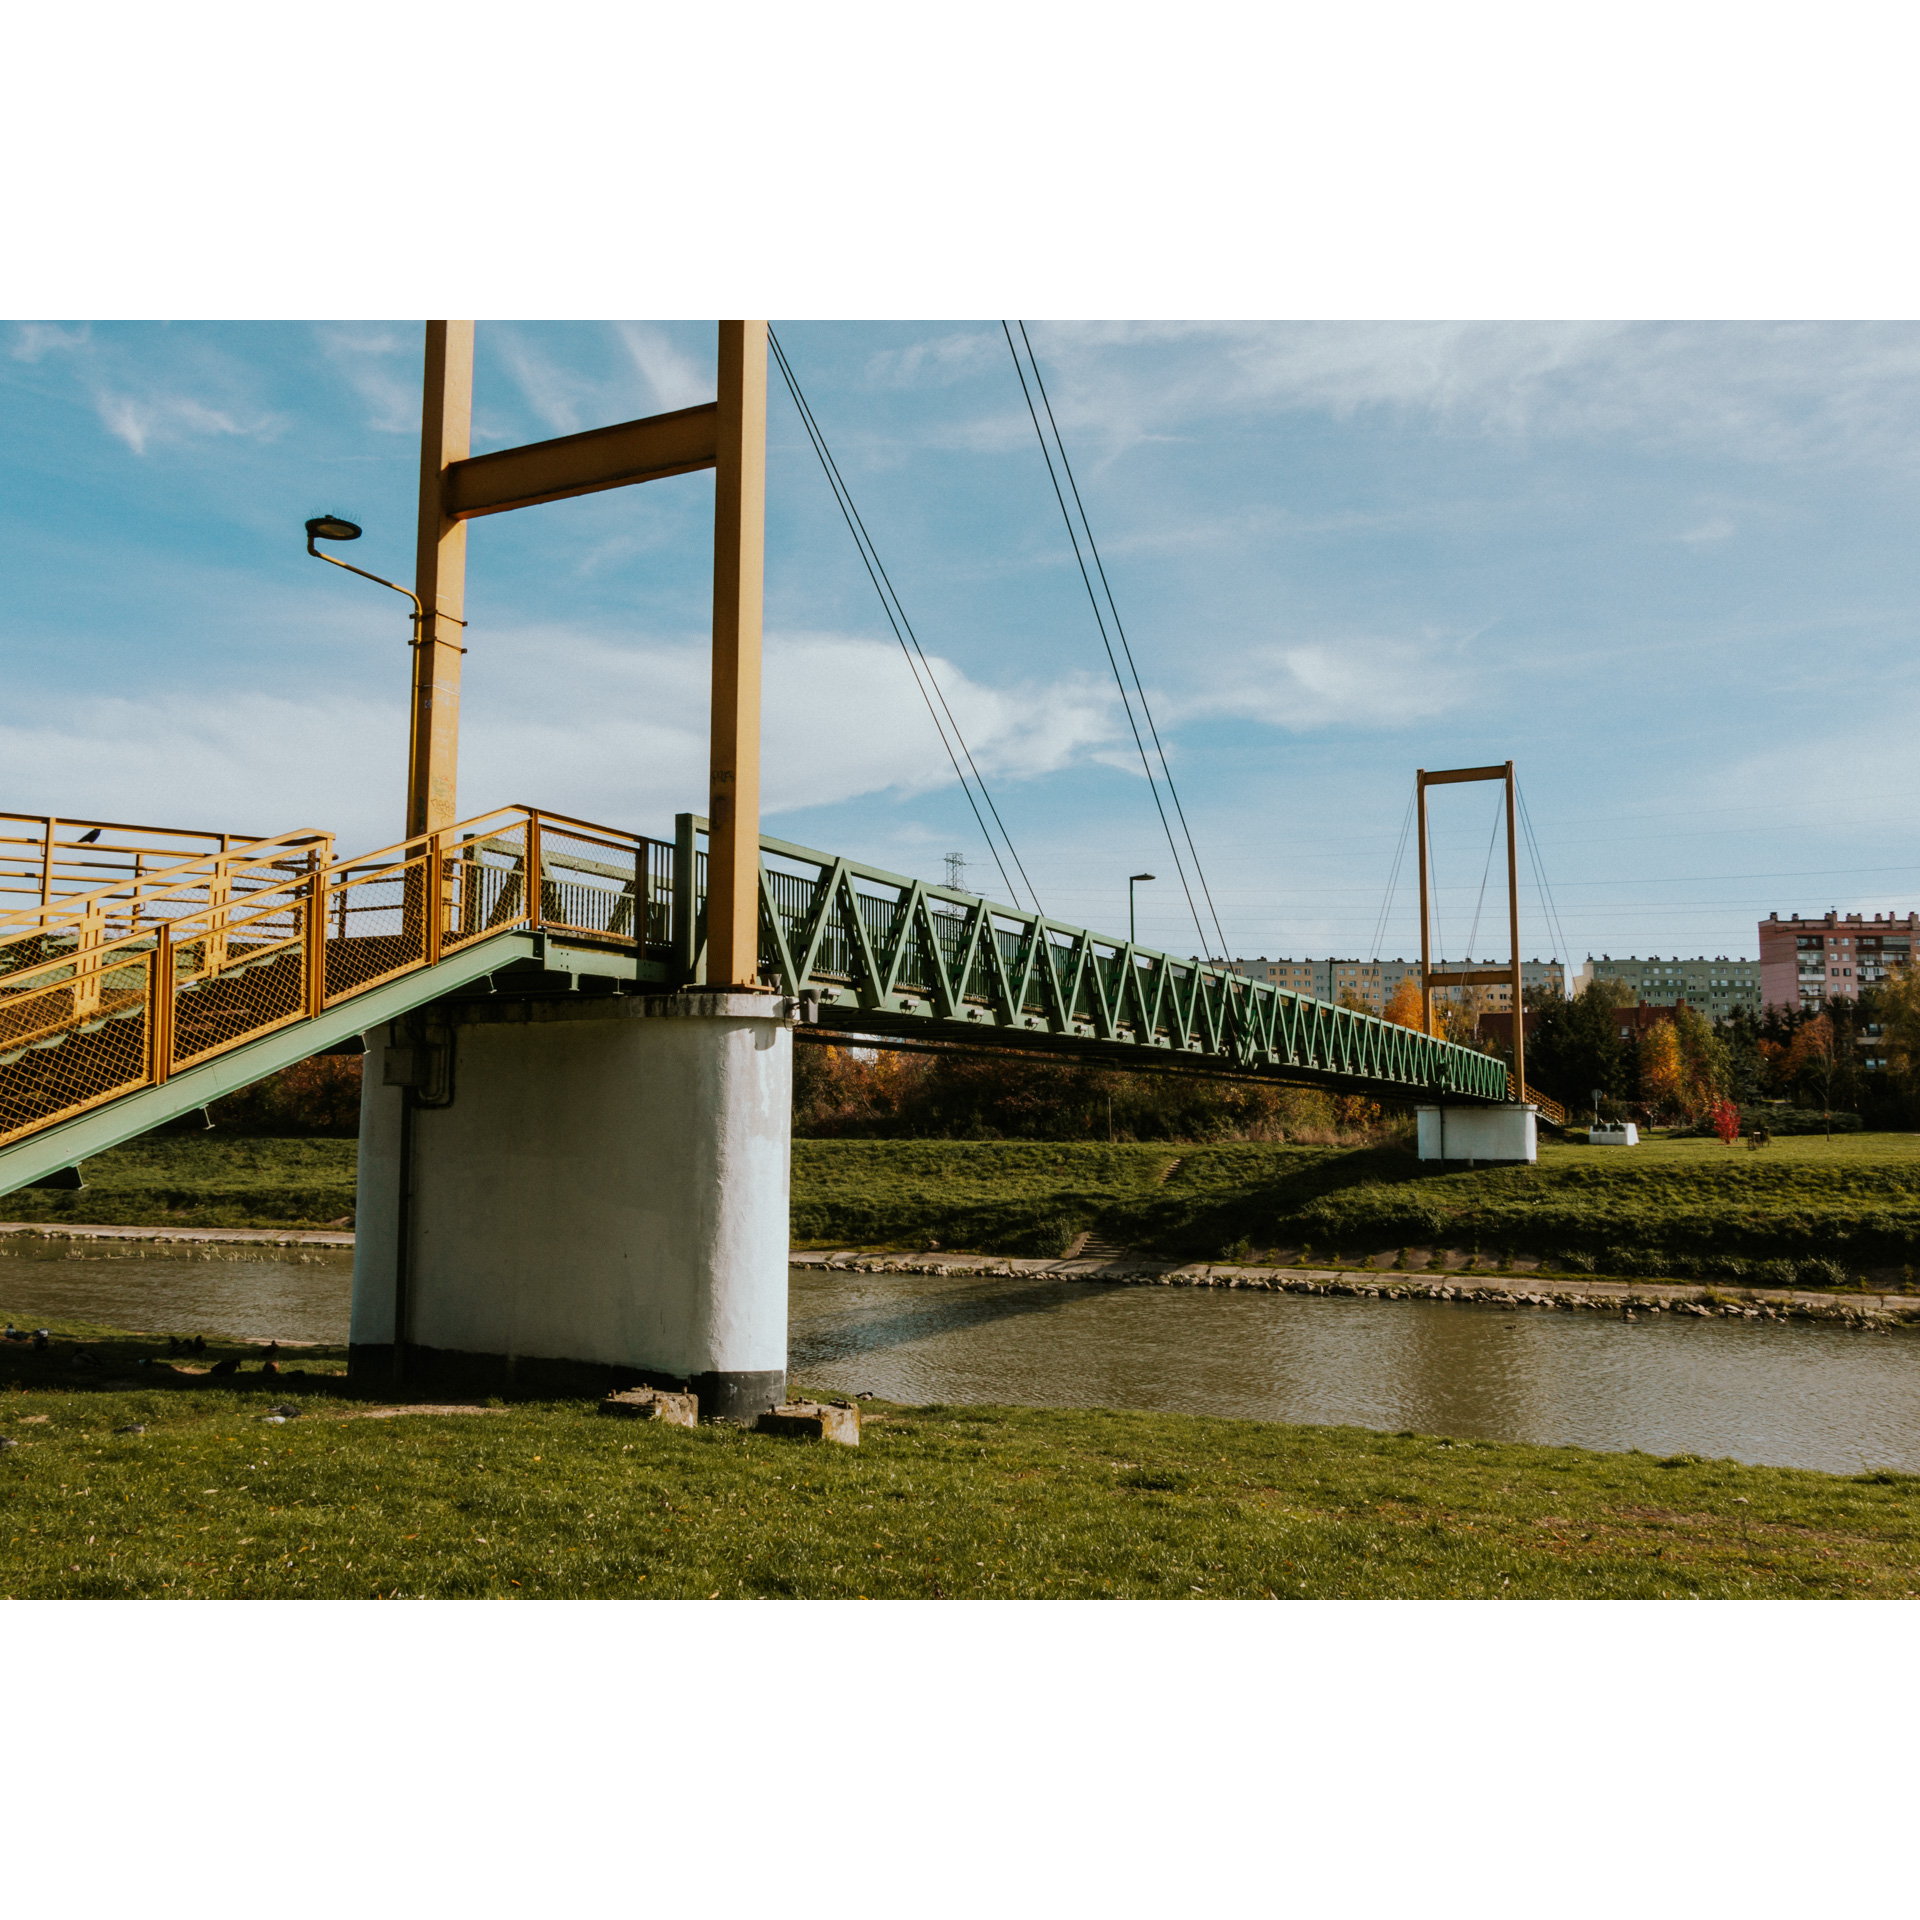 Pedestrian bridge over the river with a green railing